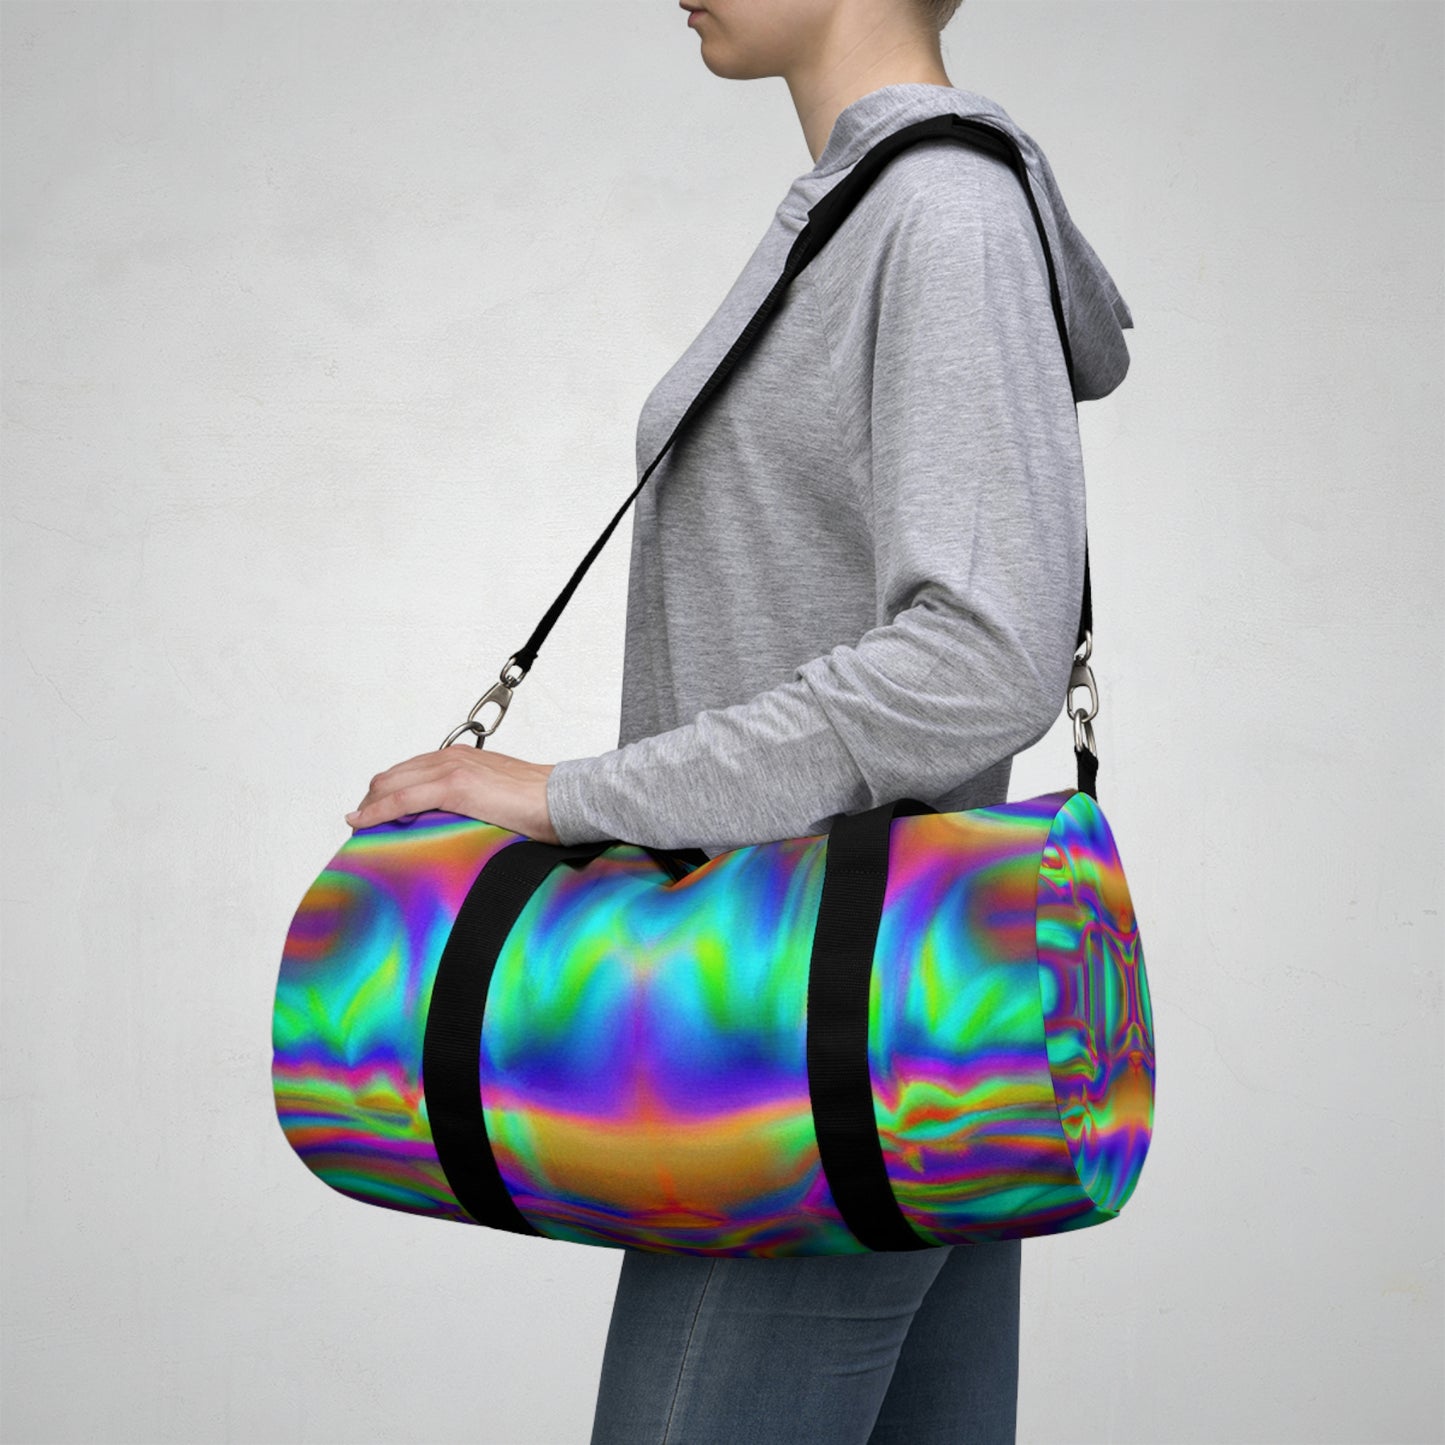 .

Luxacie - Psychedelic Duffel Bag